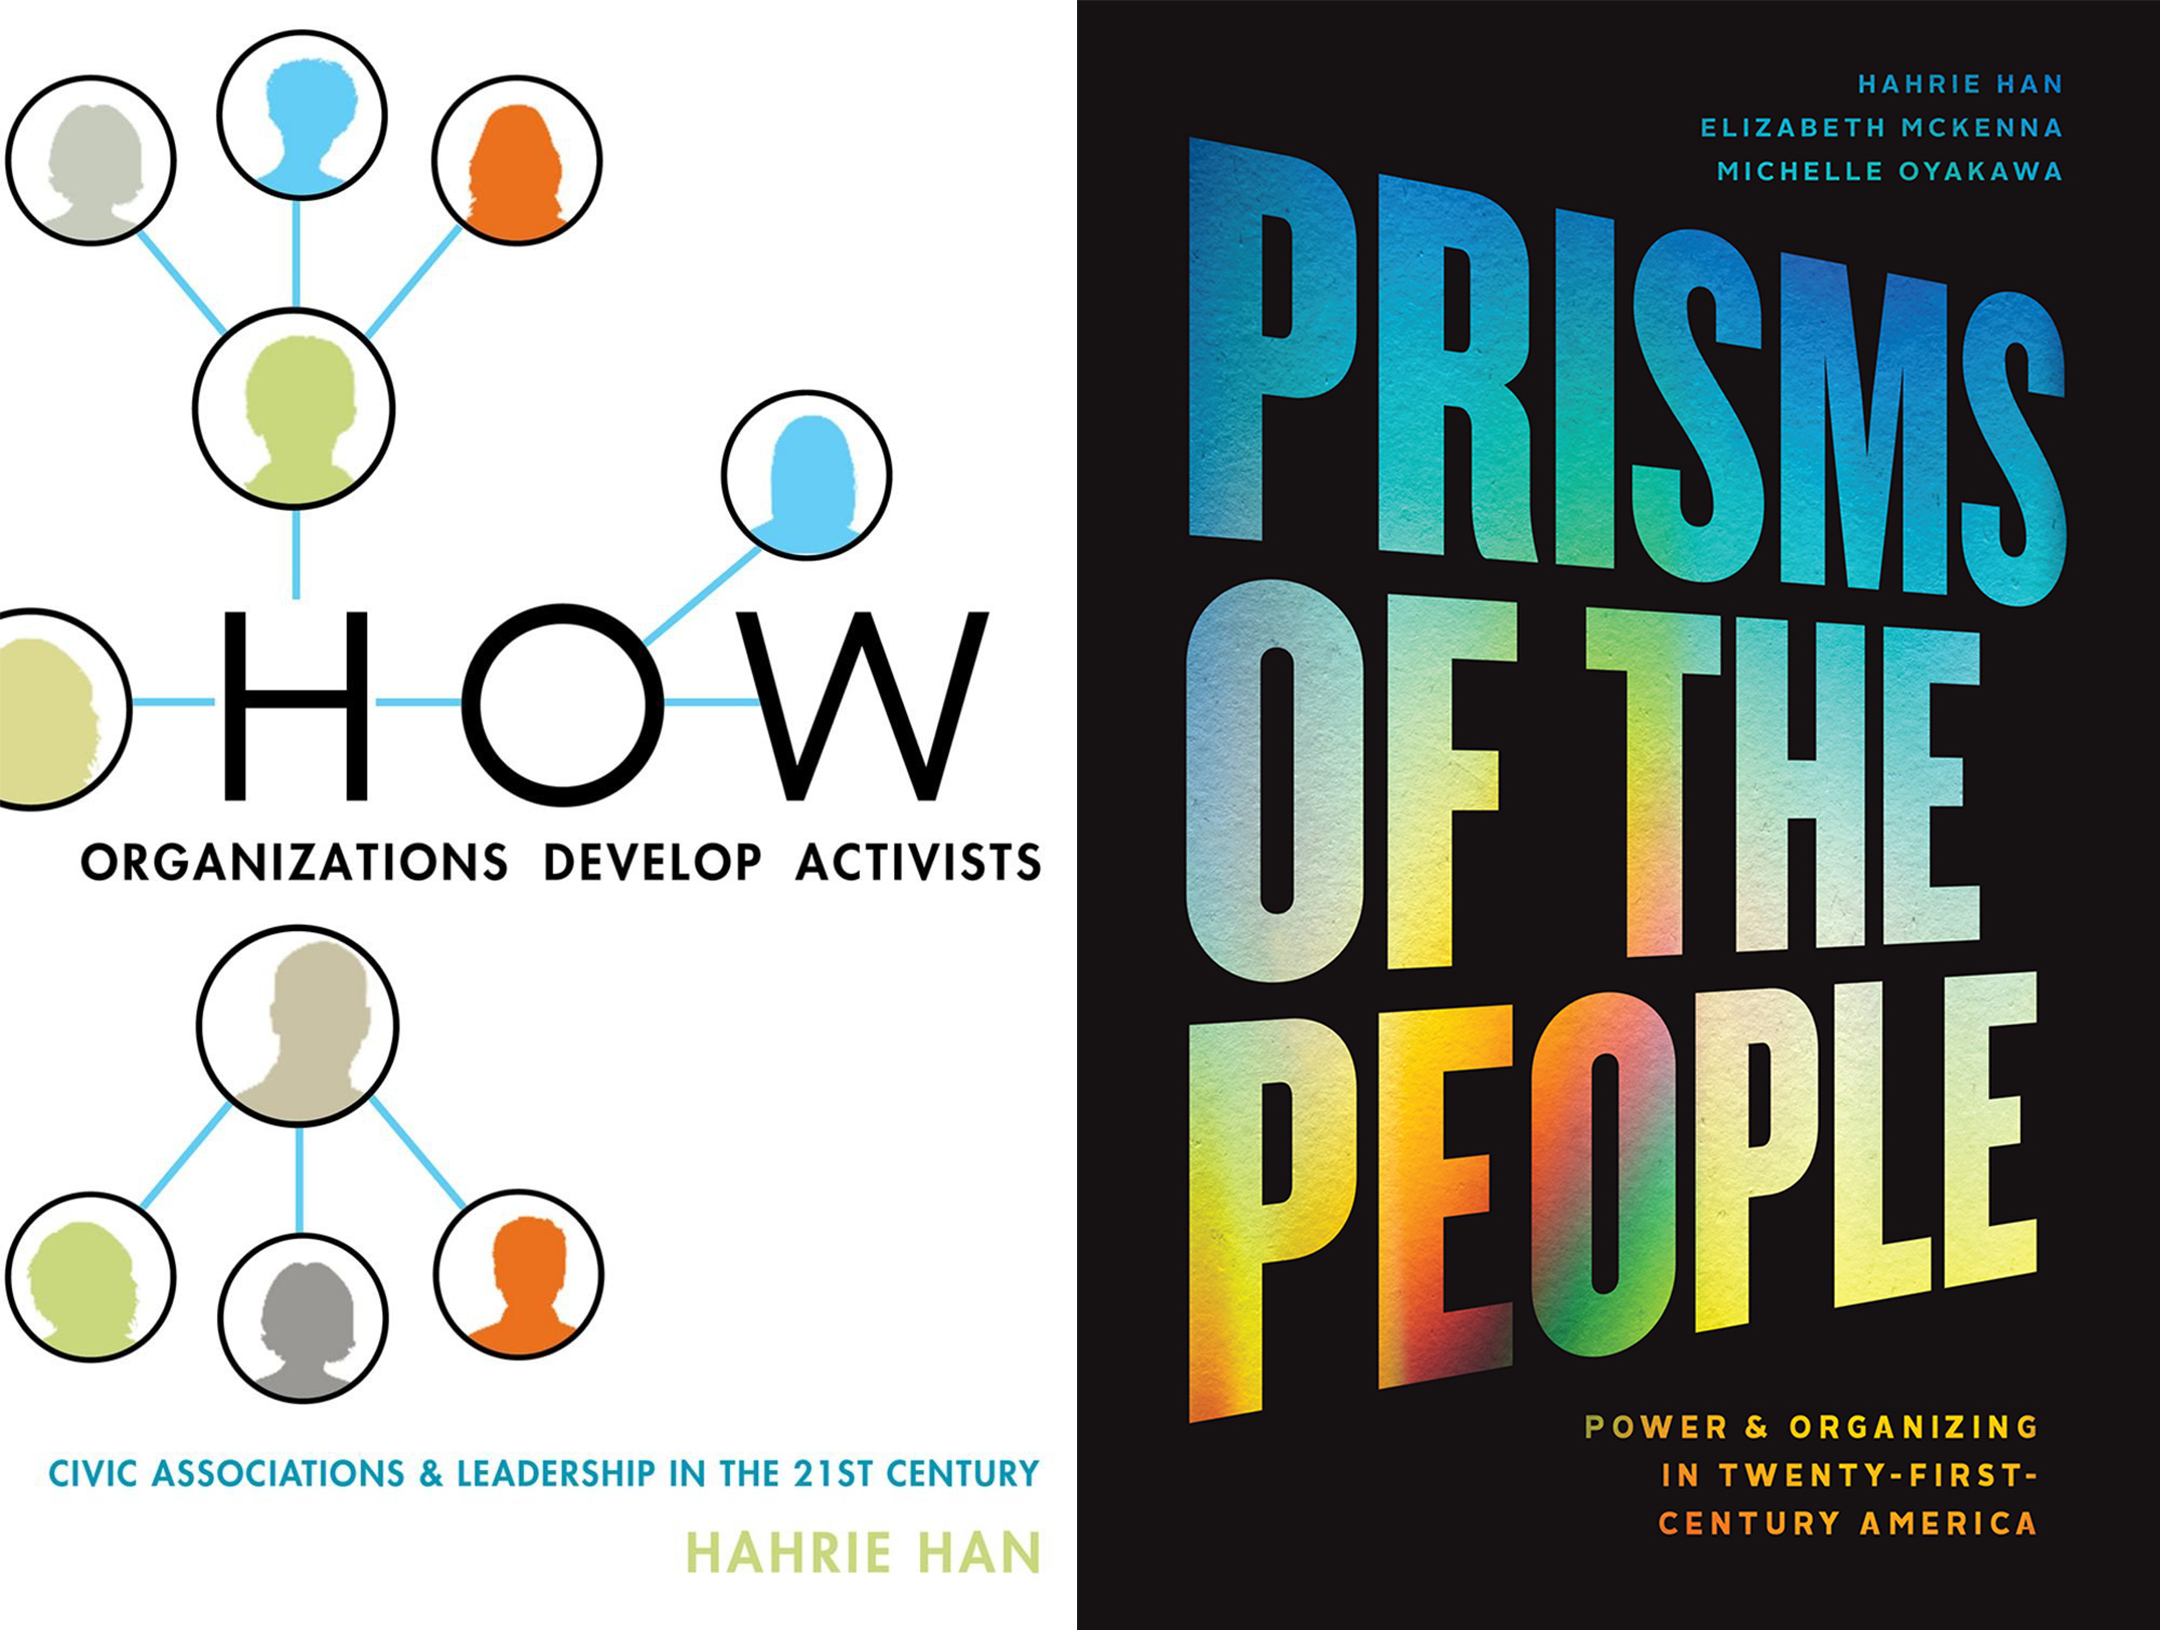 Covers of the books How Organizations Develop Activists and Prisms of the People